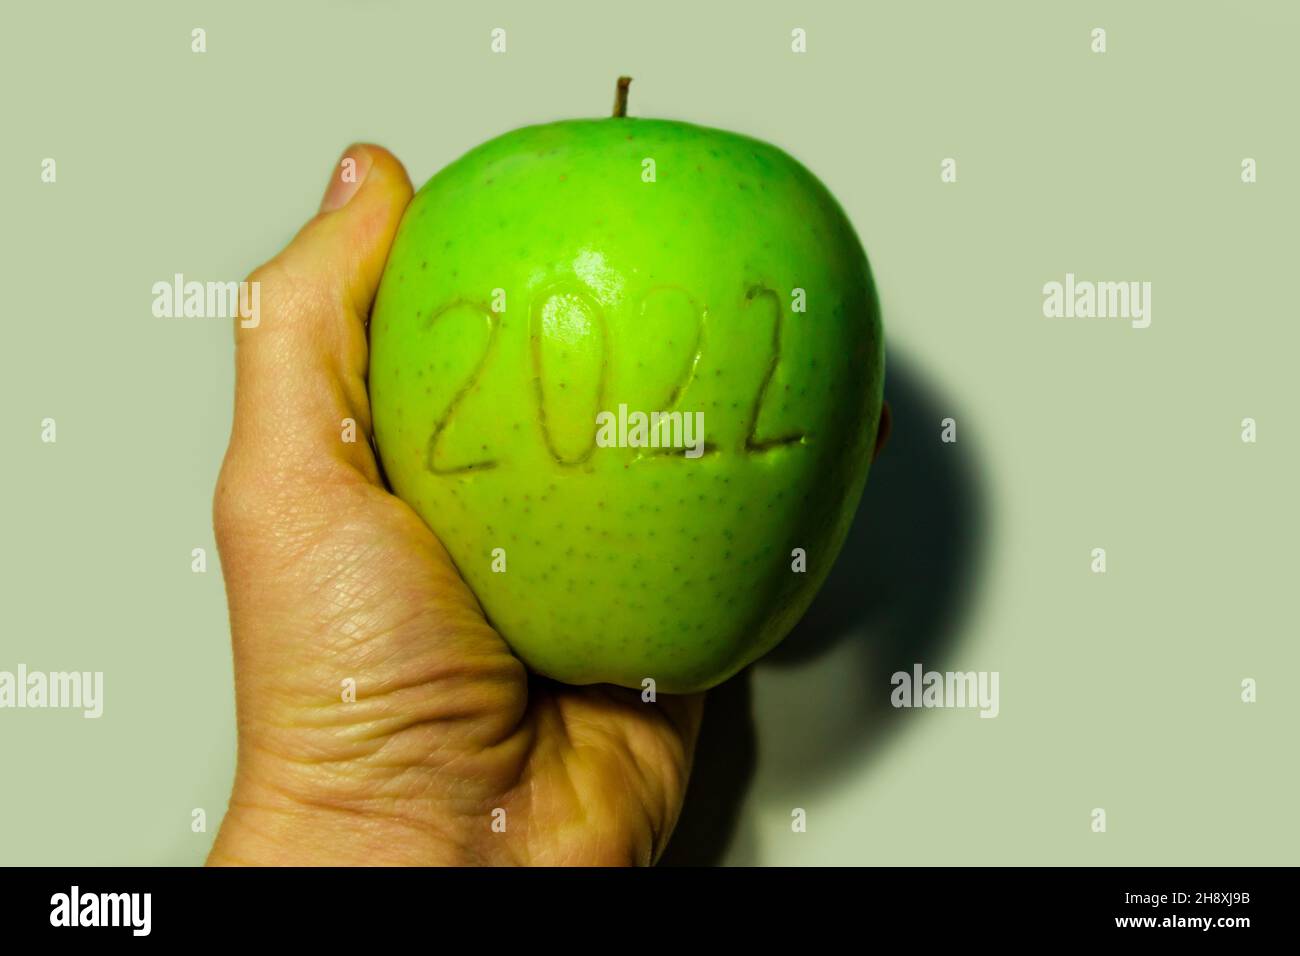 Number 2022, placed on an apple, against a white background.  Stock Photo